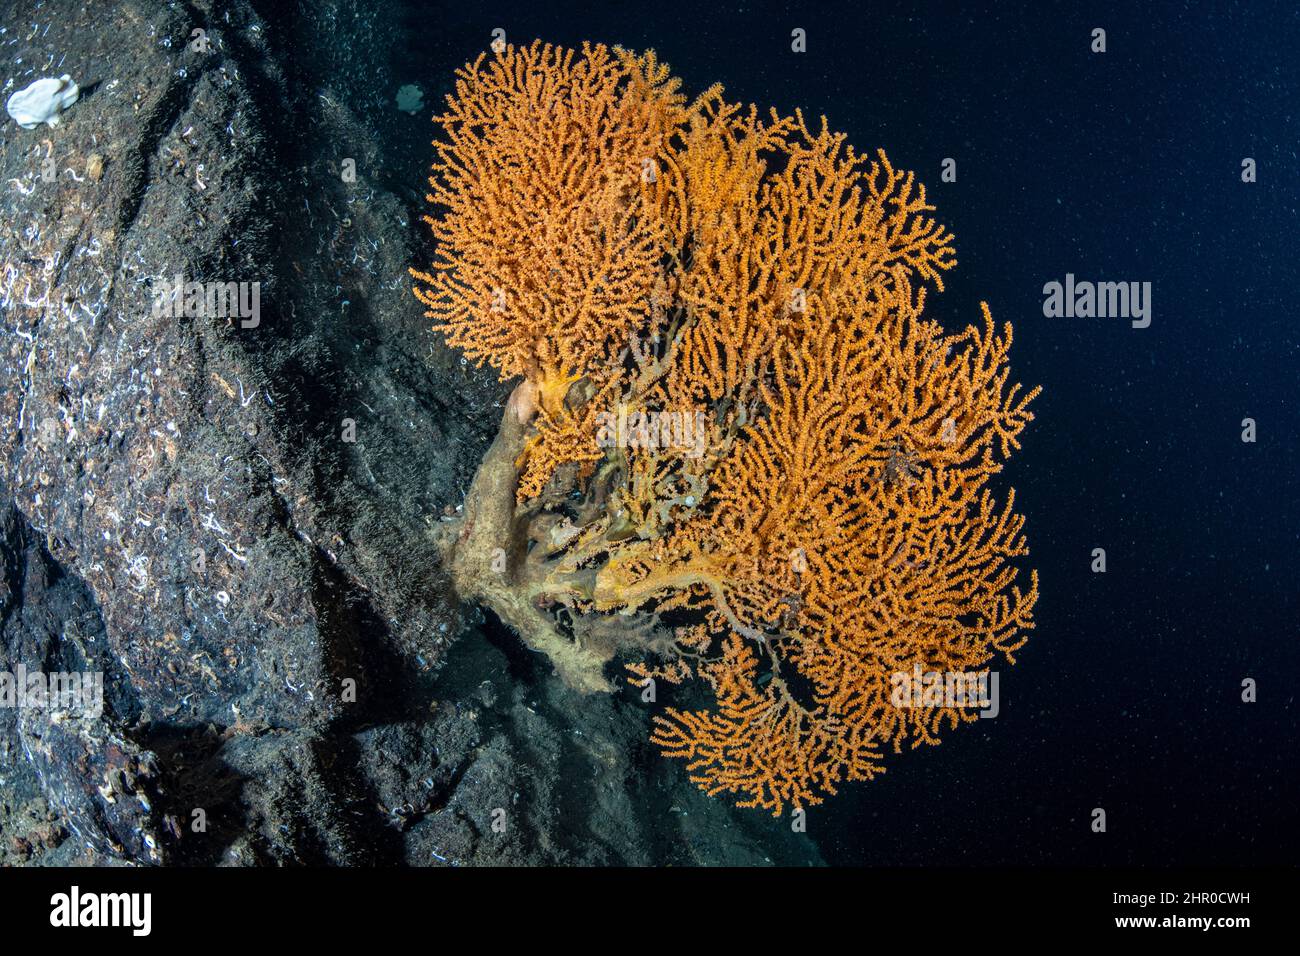 Fan coral (Paramuricea placomus) is a deep sea gorgonian that can be found at greater depths of up to 1600 meters. Trondheimsfjord, Norway, Atlantic O Stock Photo